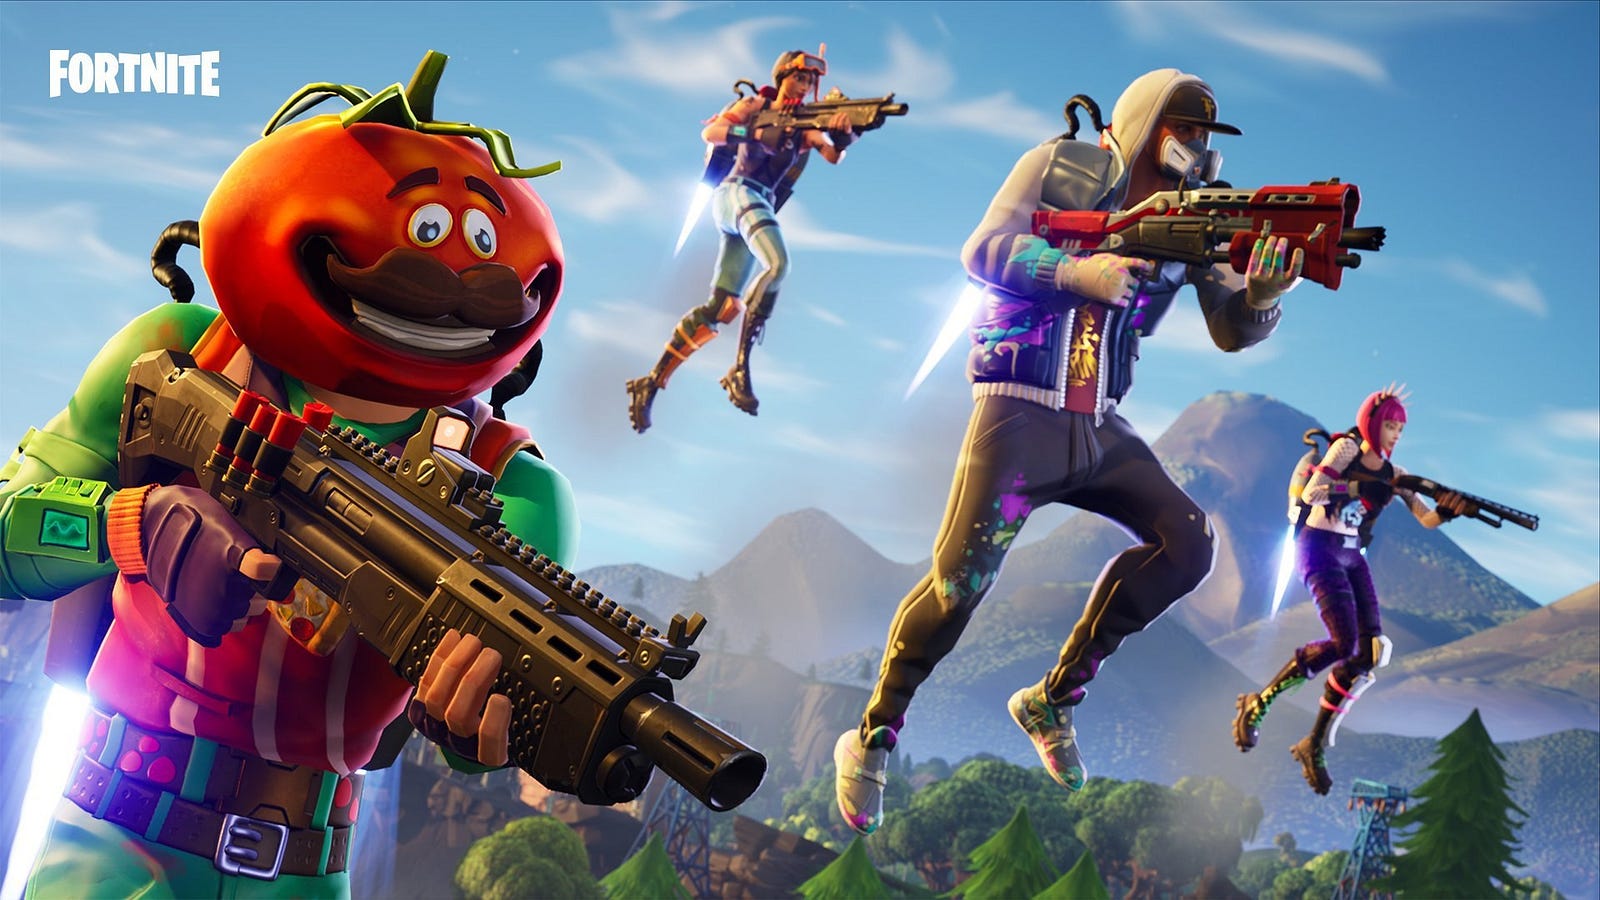 Fortnite Customs Finally Arrive The Unprofessionals - epic games melissa announced on twitter that fortnite would finally be getting customs for creators to mess around with she announced it on twitter along